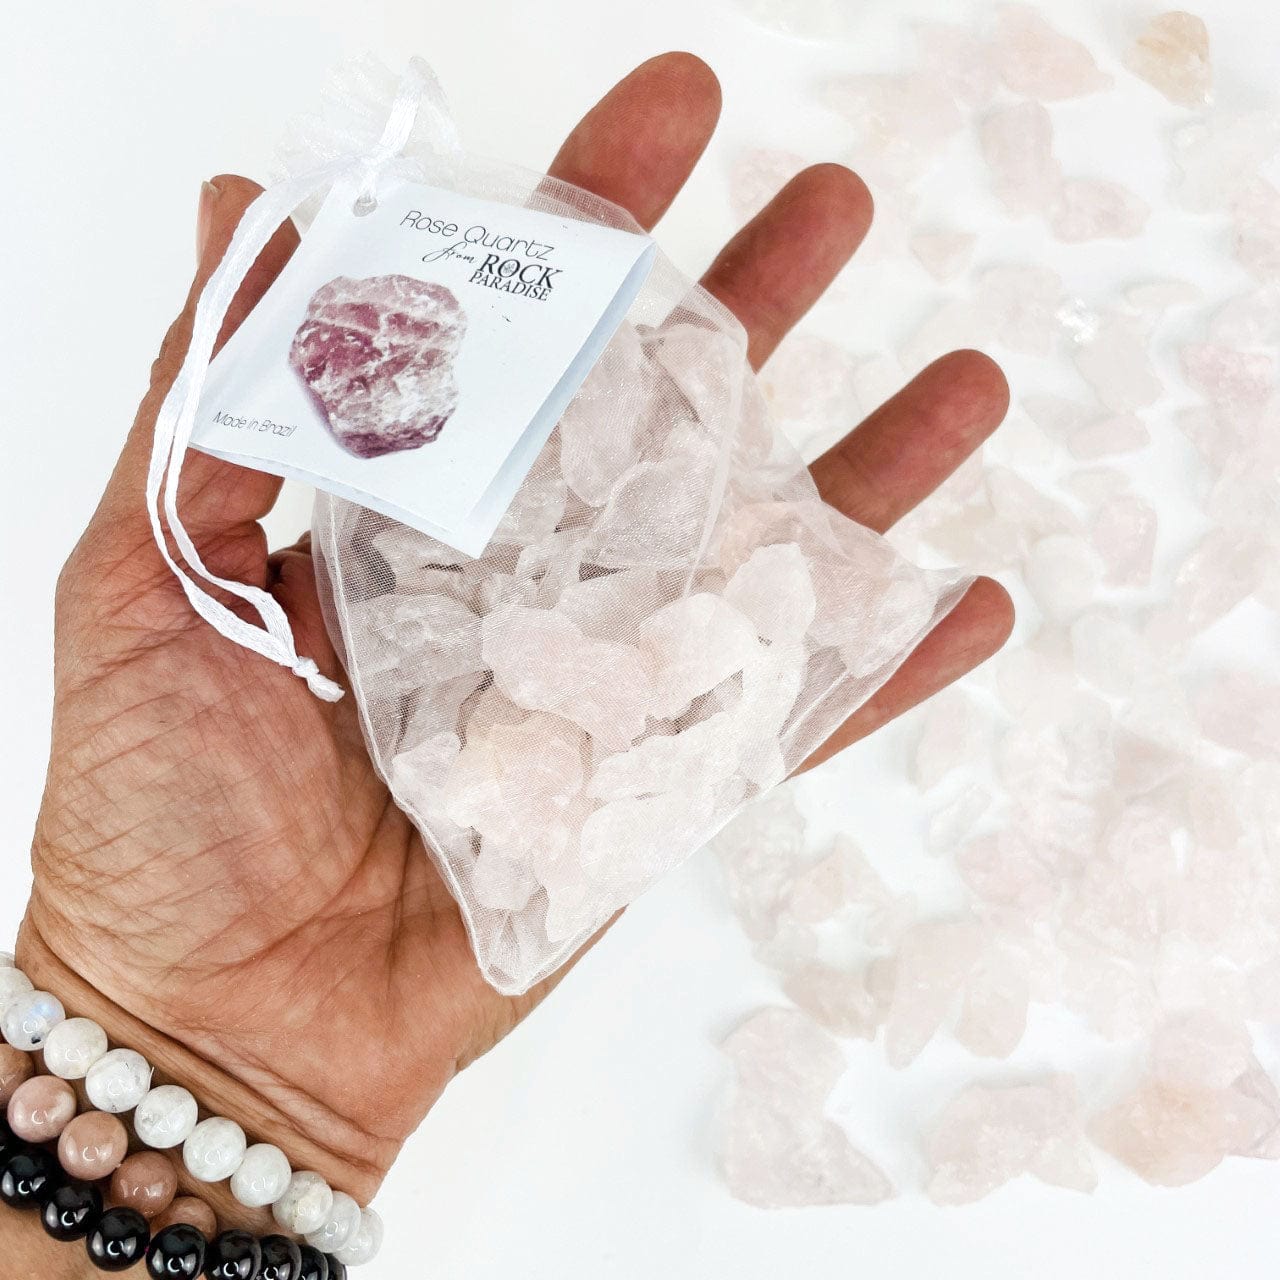 Rose Quartz Stones - Tied & Tagged in an Organza Bag in a hand